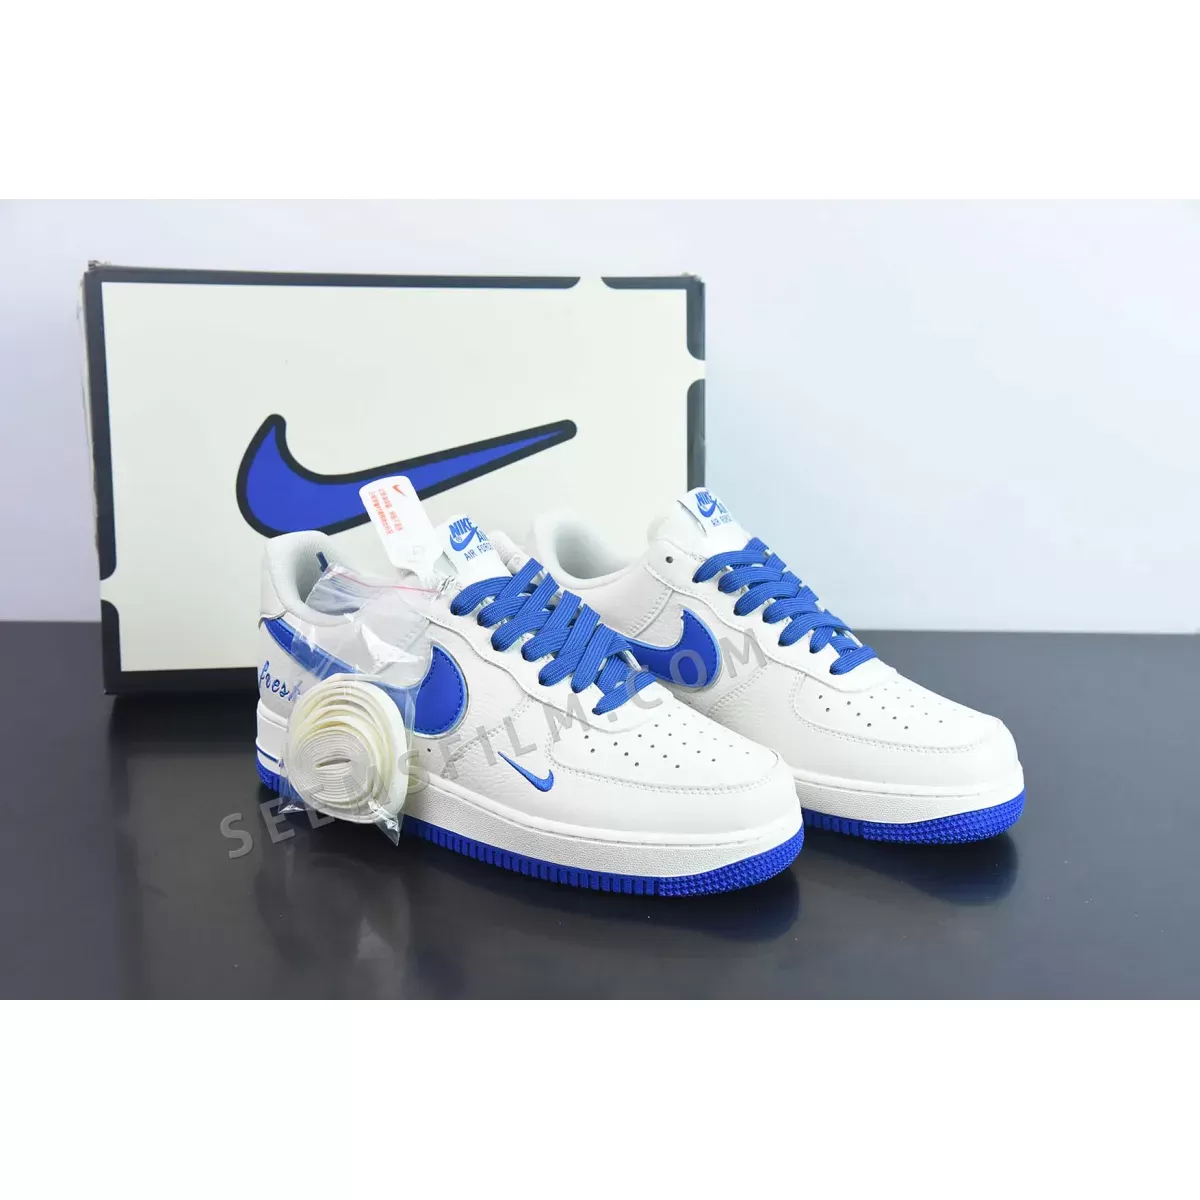 Nike Air Force 1 Low White/Royal Blue 1679650130 New Releases - seemSfilm